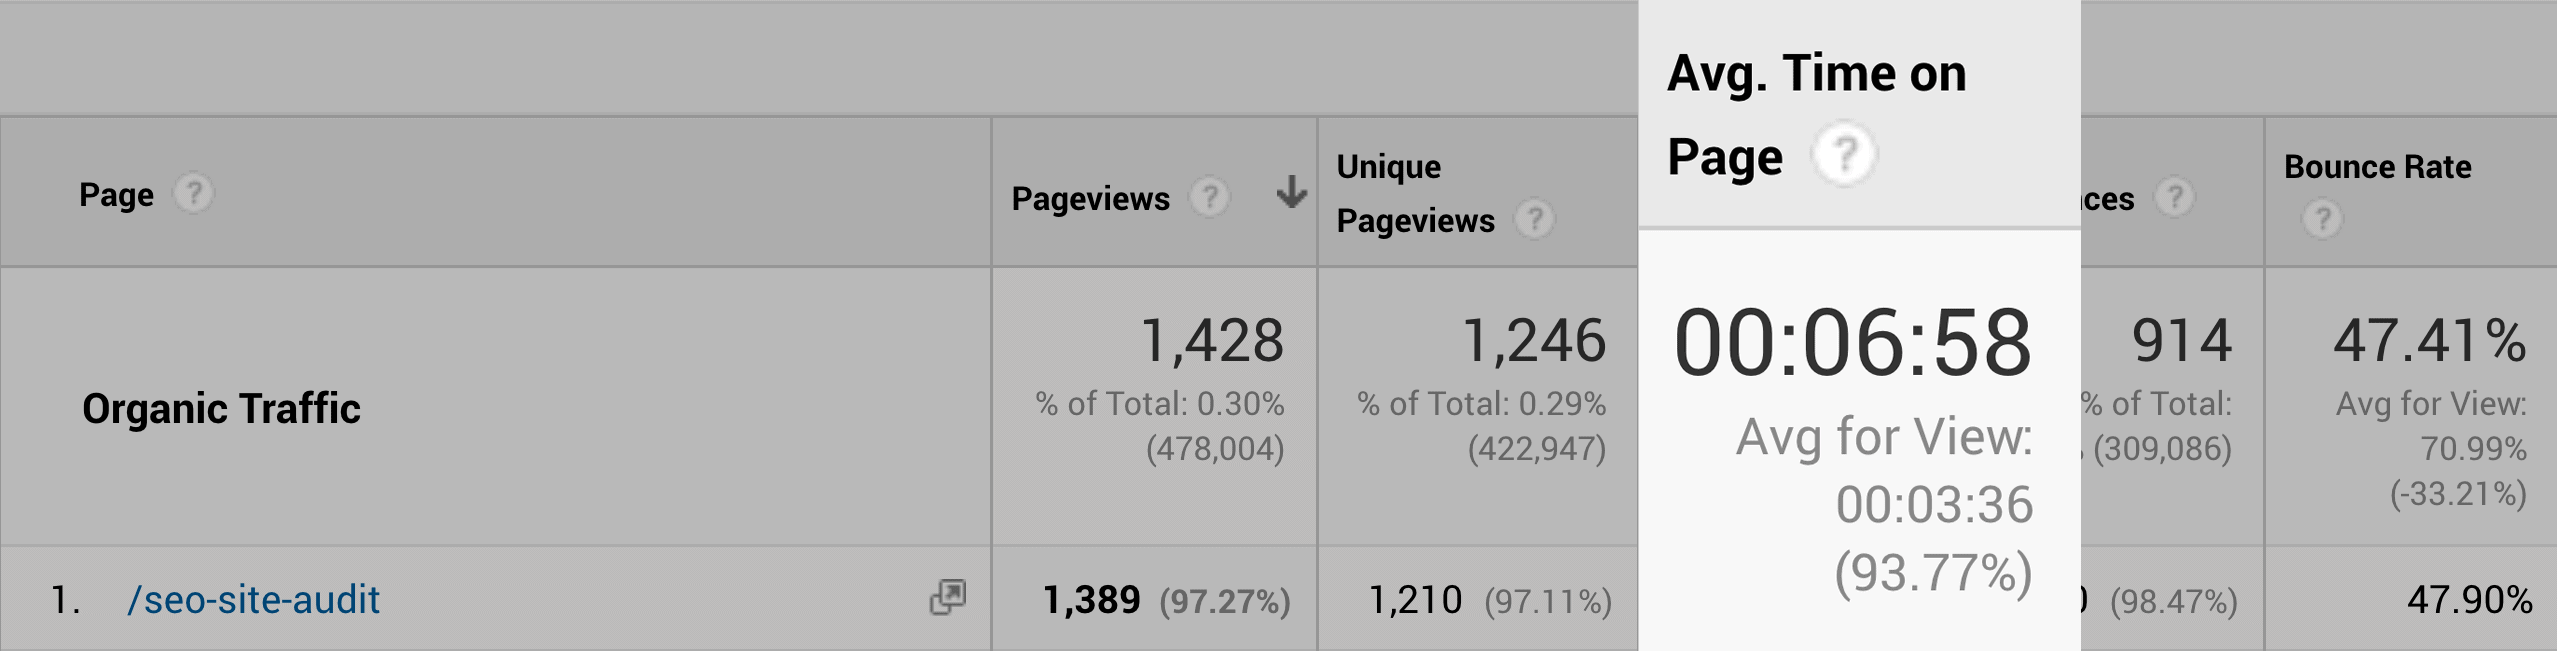 Average time on page